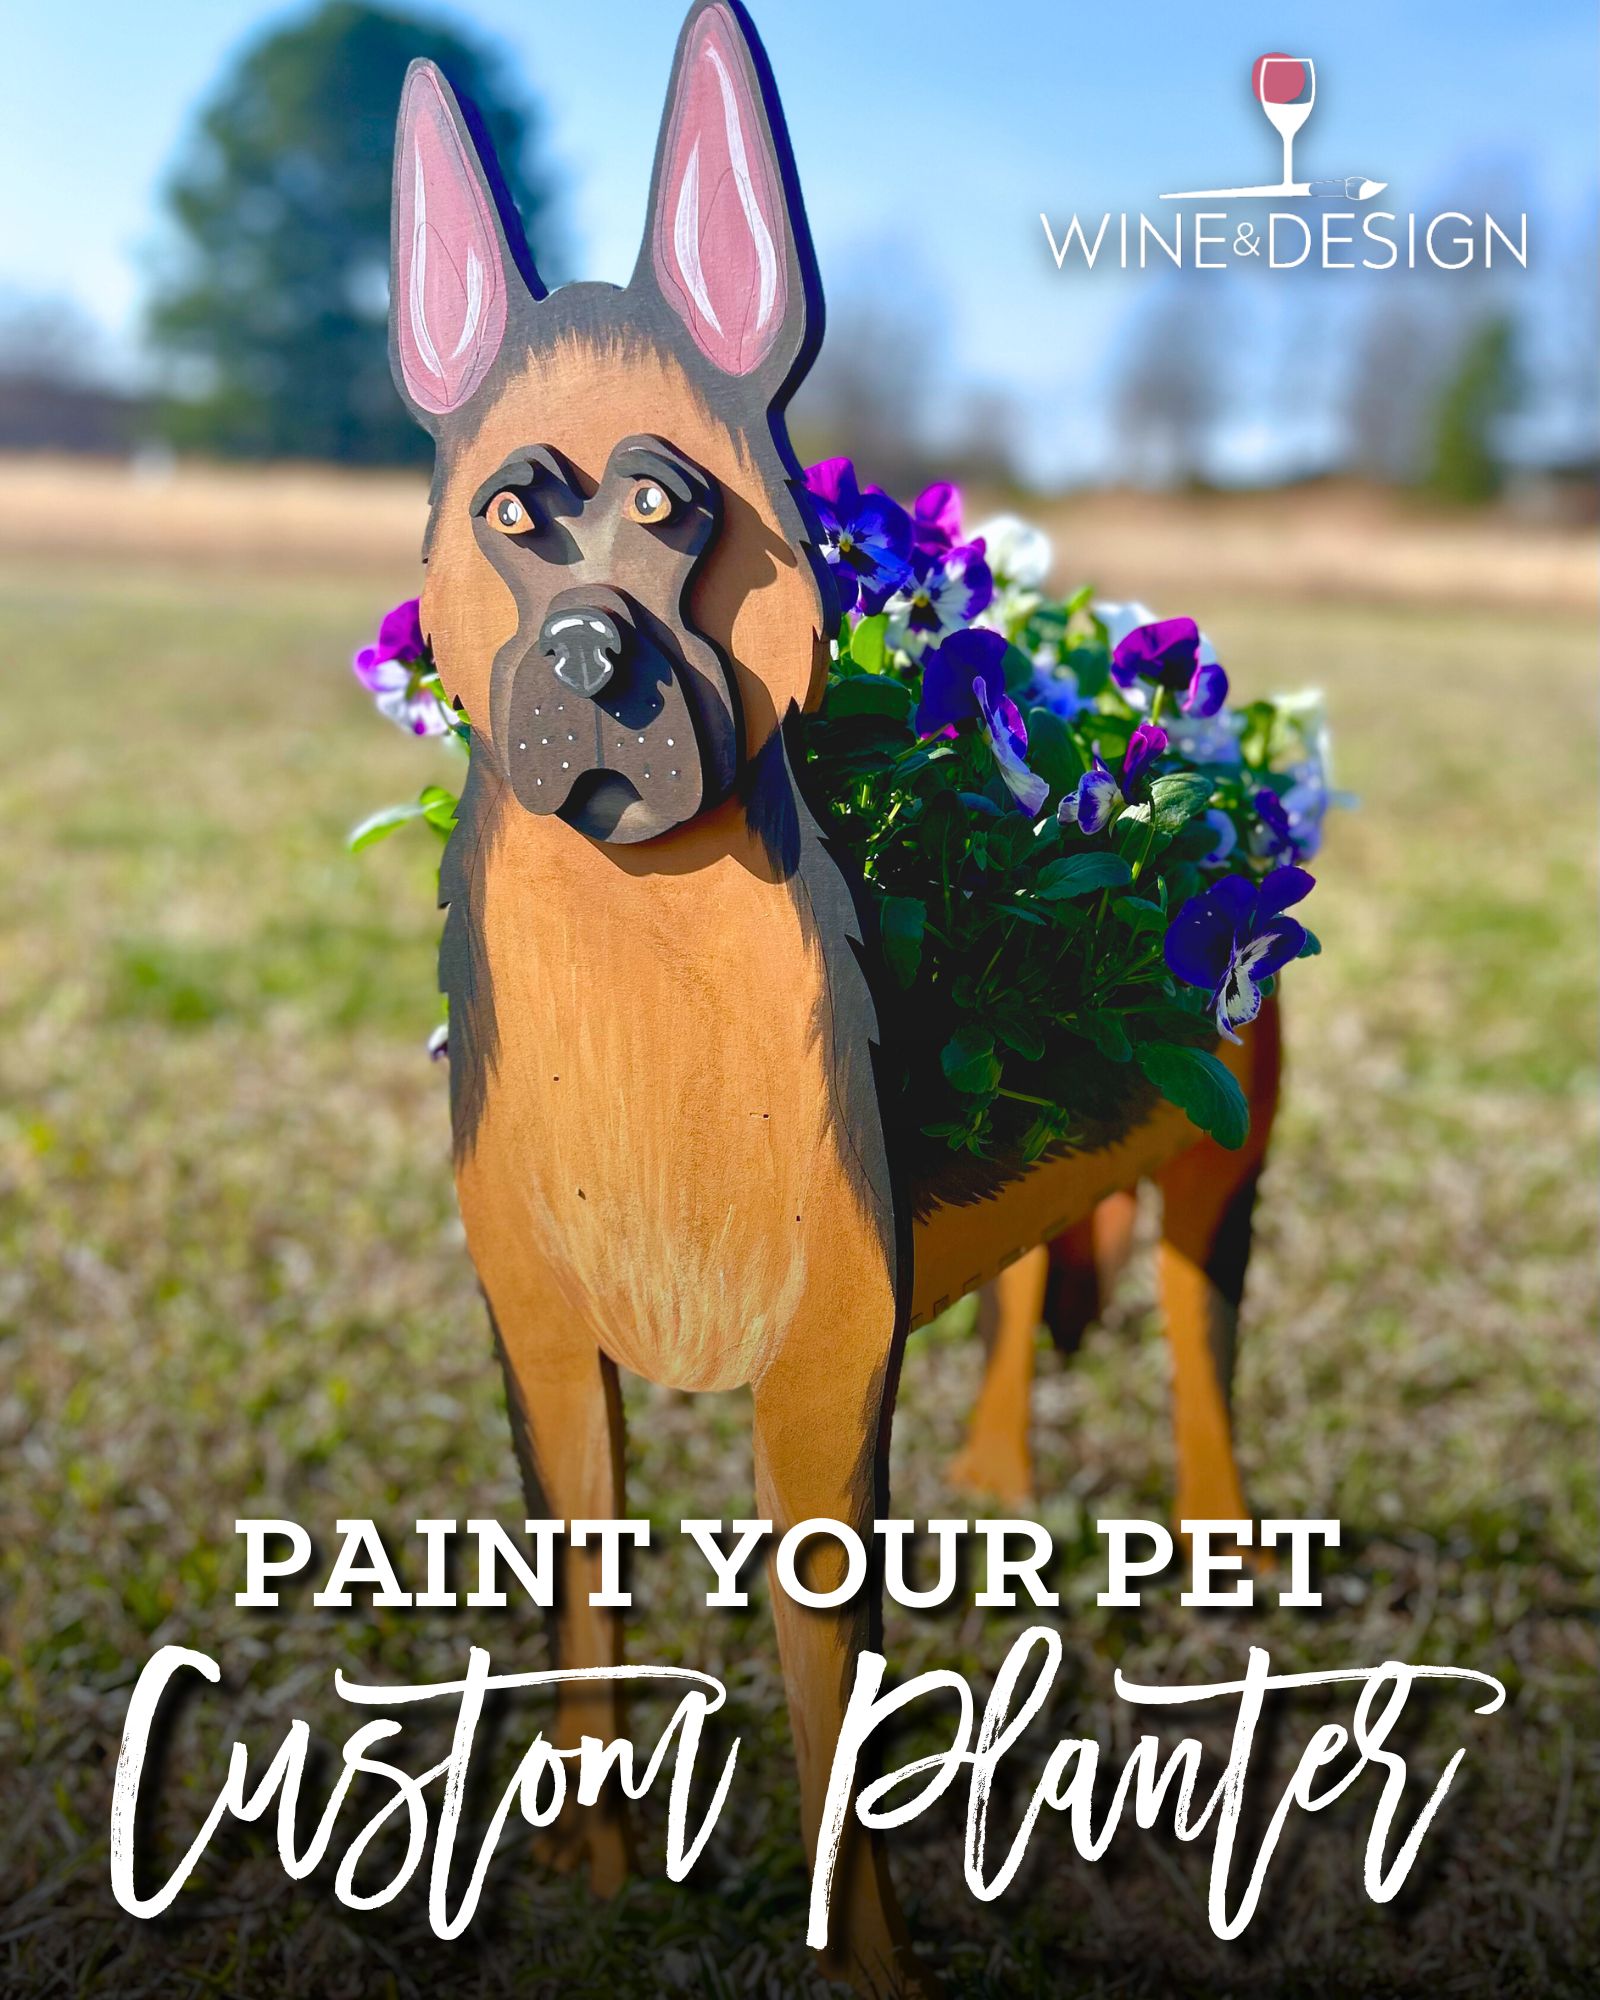 SOLD OUT! 24" Paint Your Pet Custom Planter Box